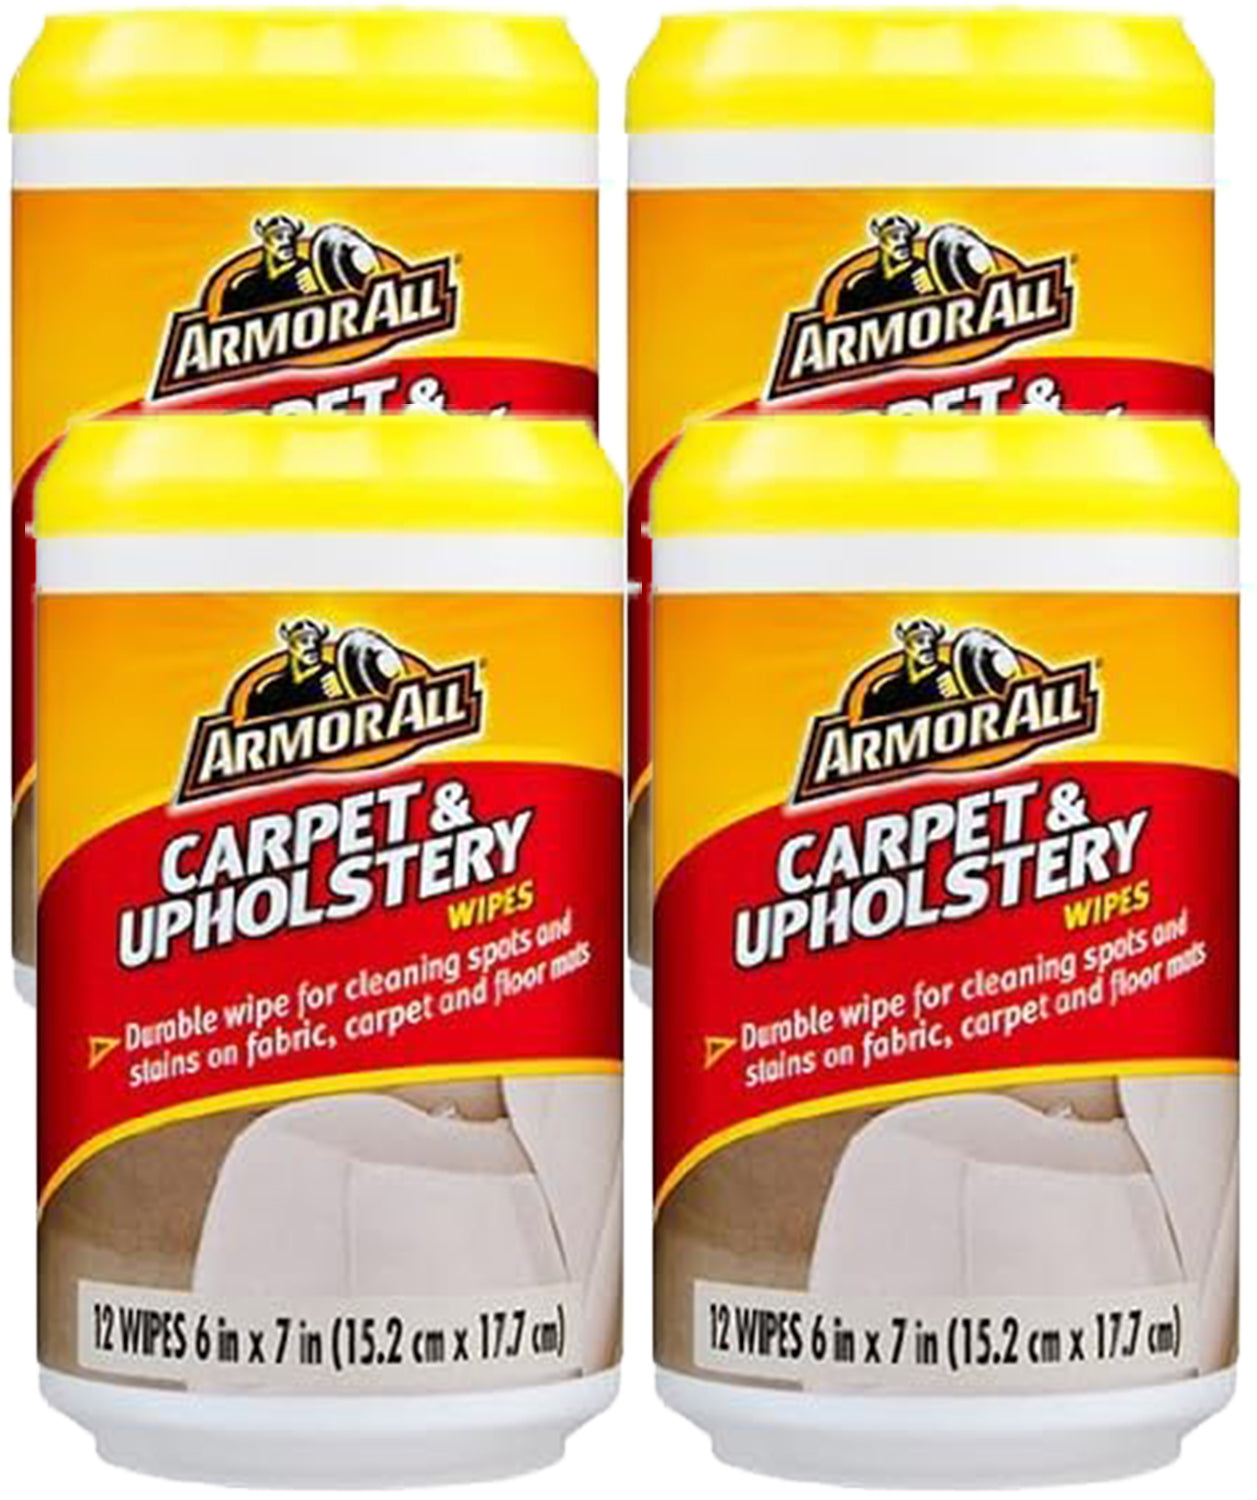 Armor All Carpet & Upholstery Wipes - 12 wipes